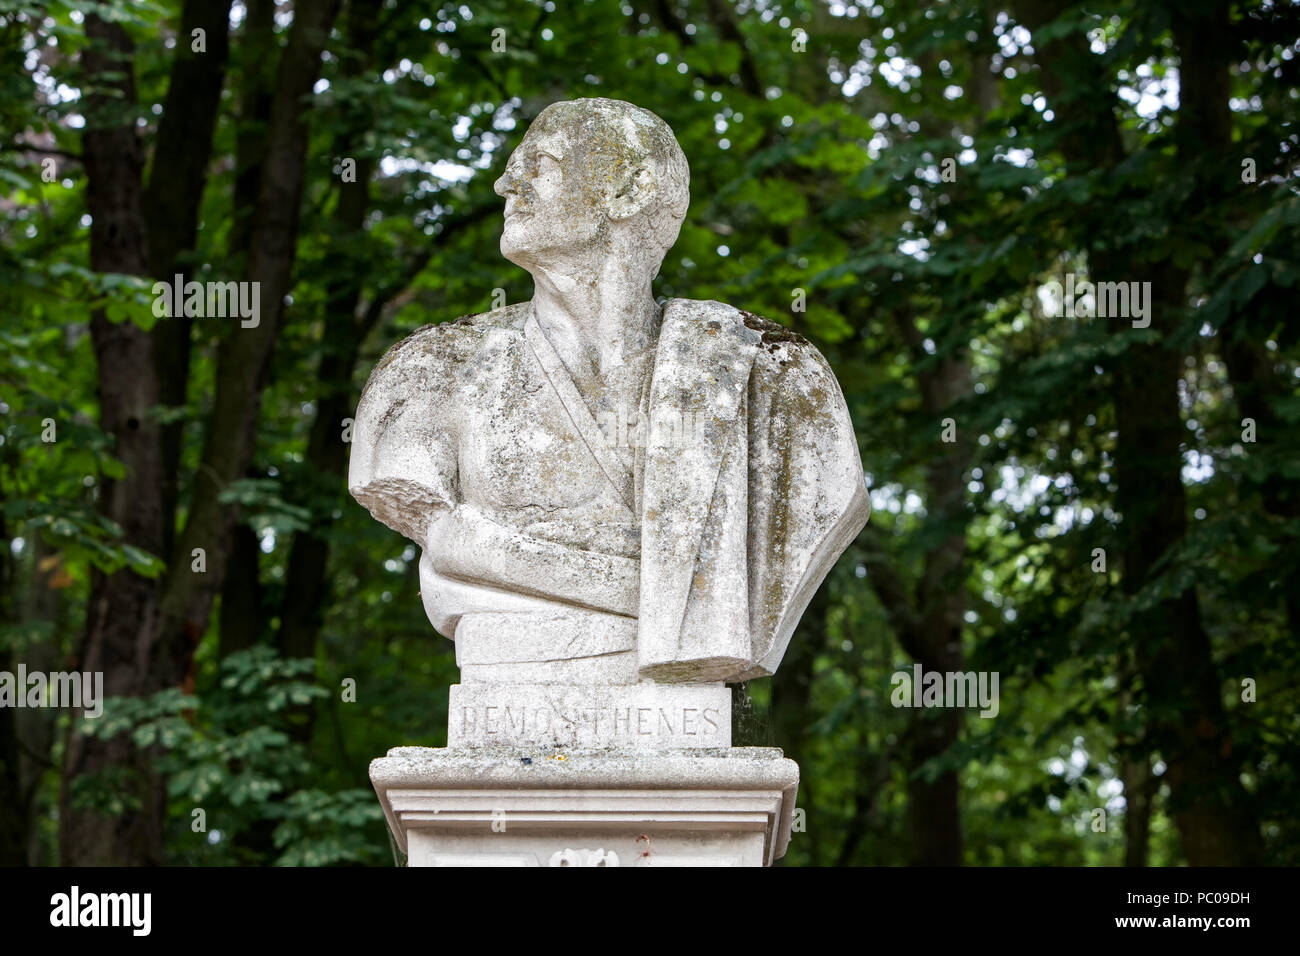 Demosthenes, 384-322 BC, a Greek statesman and orator of ancient Athens, bust at Nordkirchen Moated Palace, Germany Stock Photo